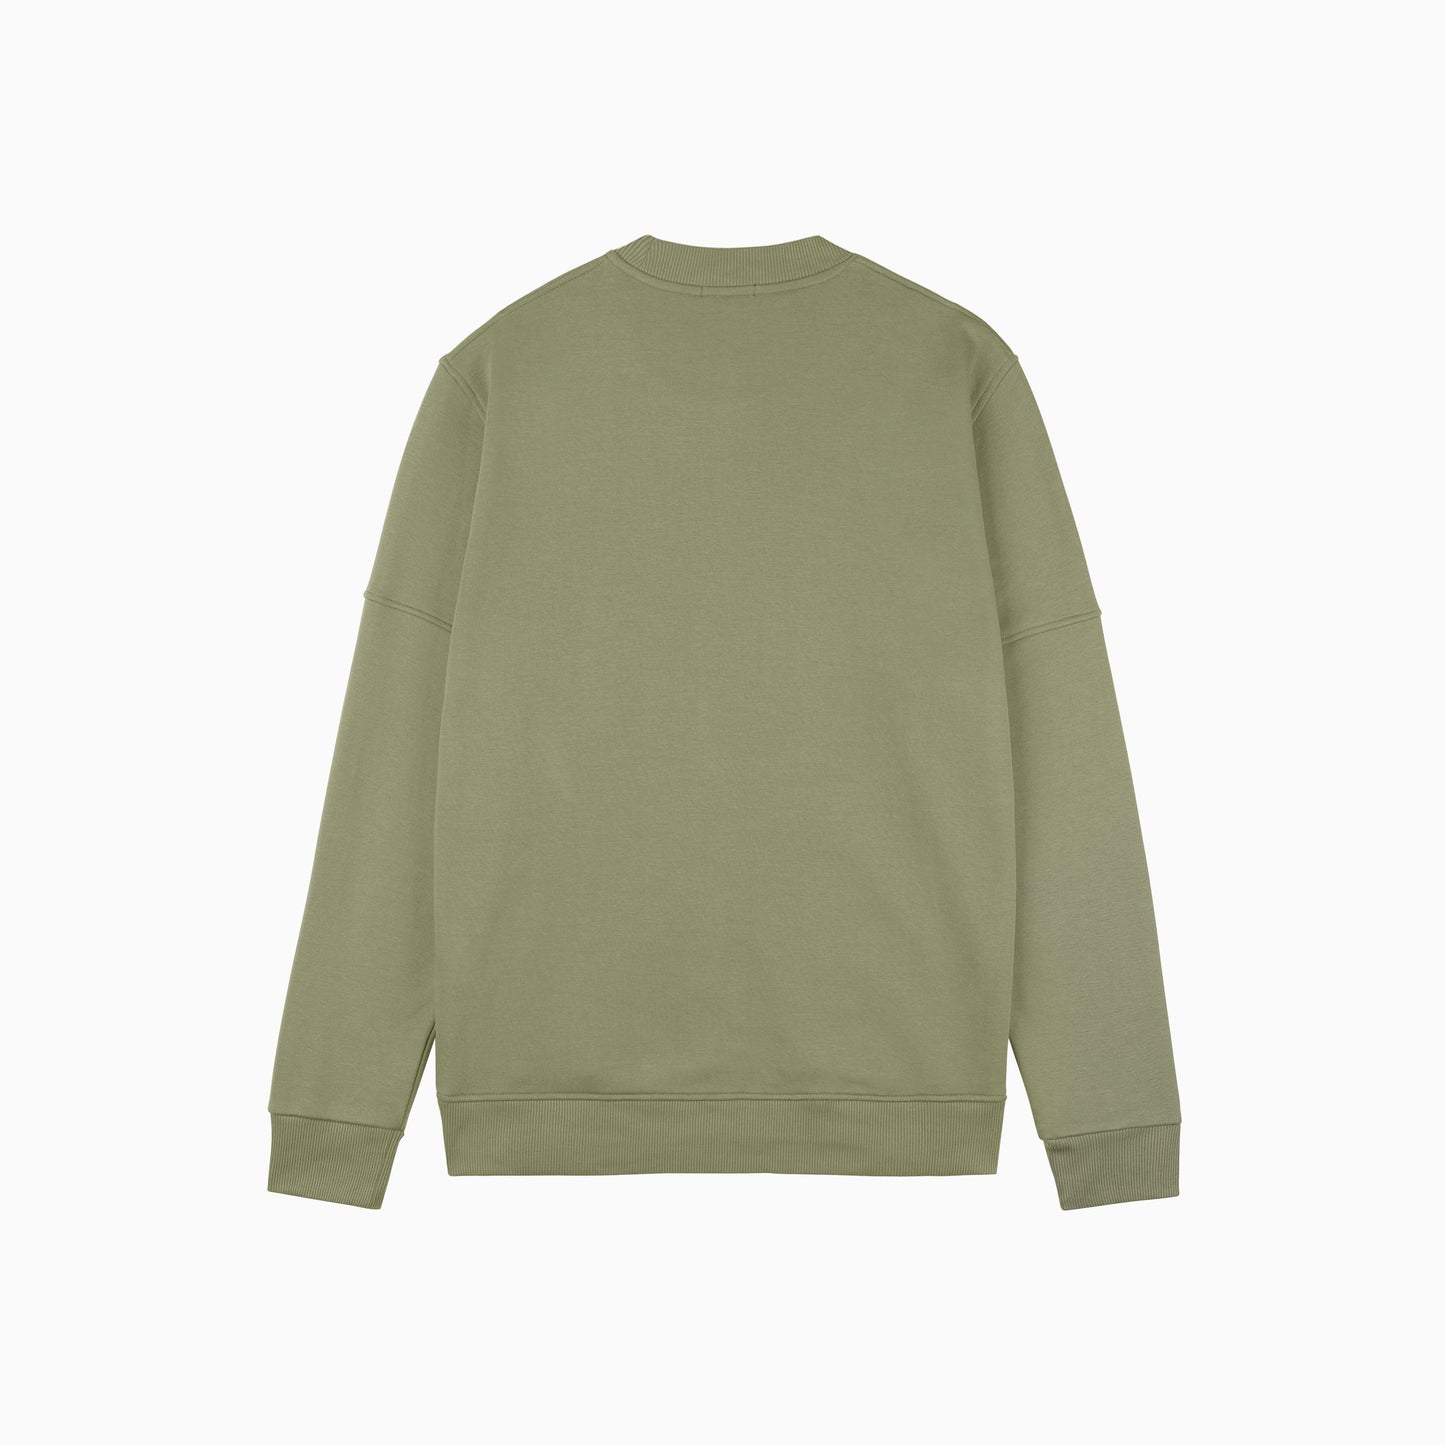 CROYEZ ABSTRACT SWEATER - LIGHT ARMY